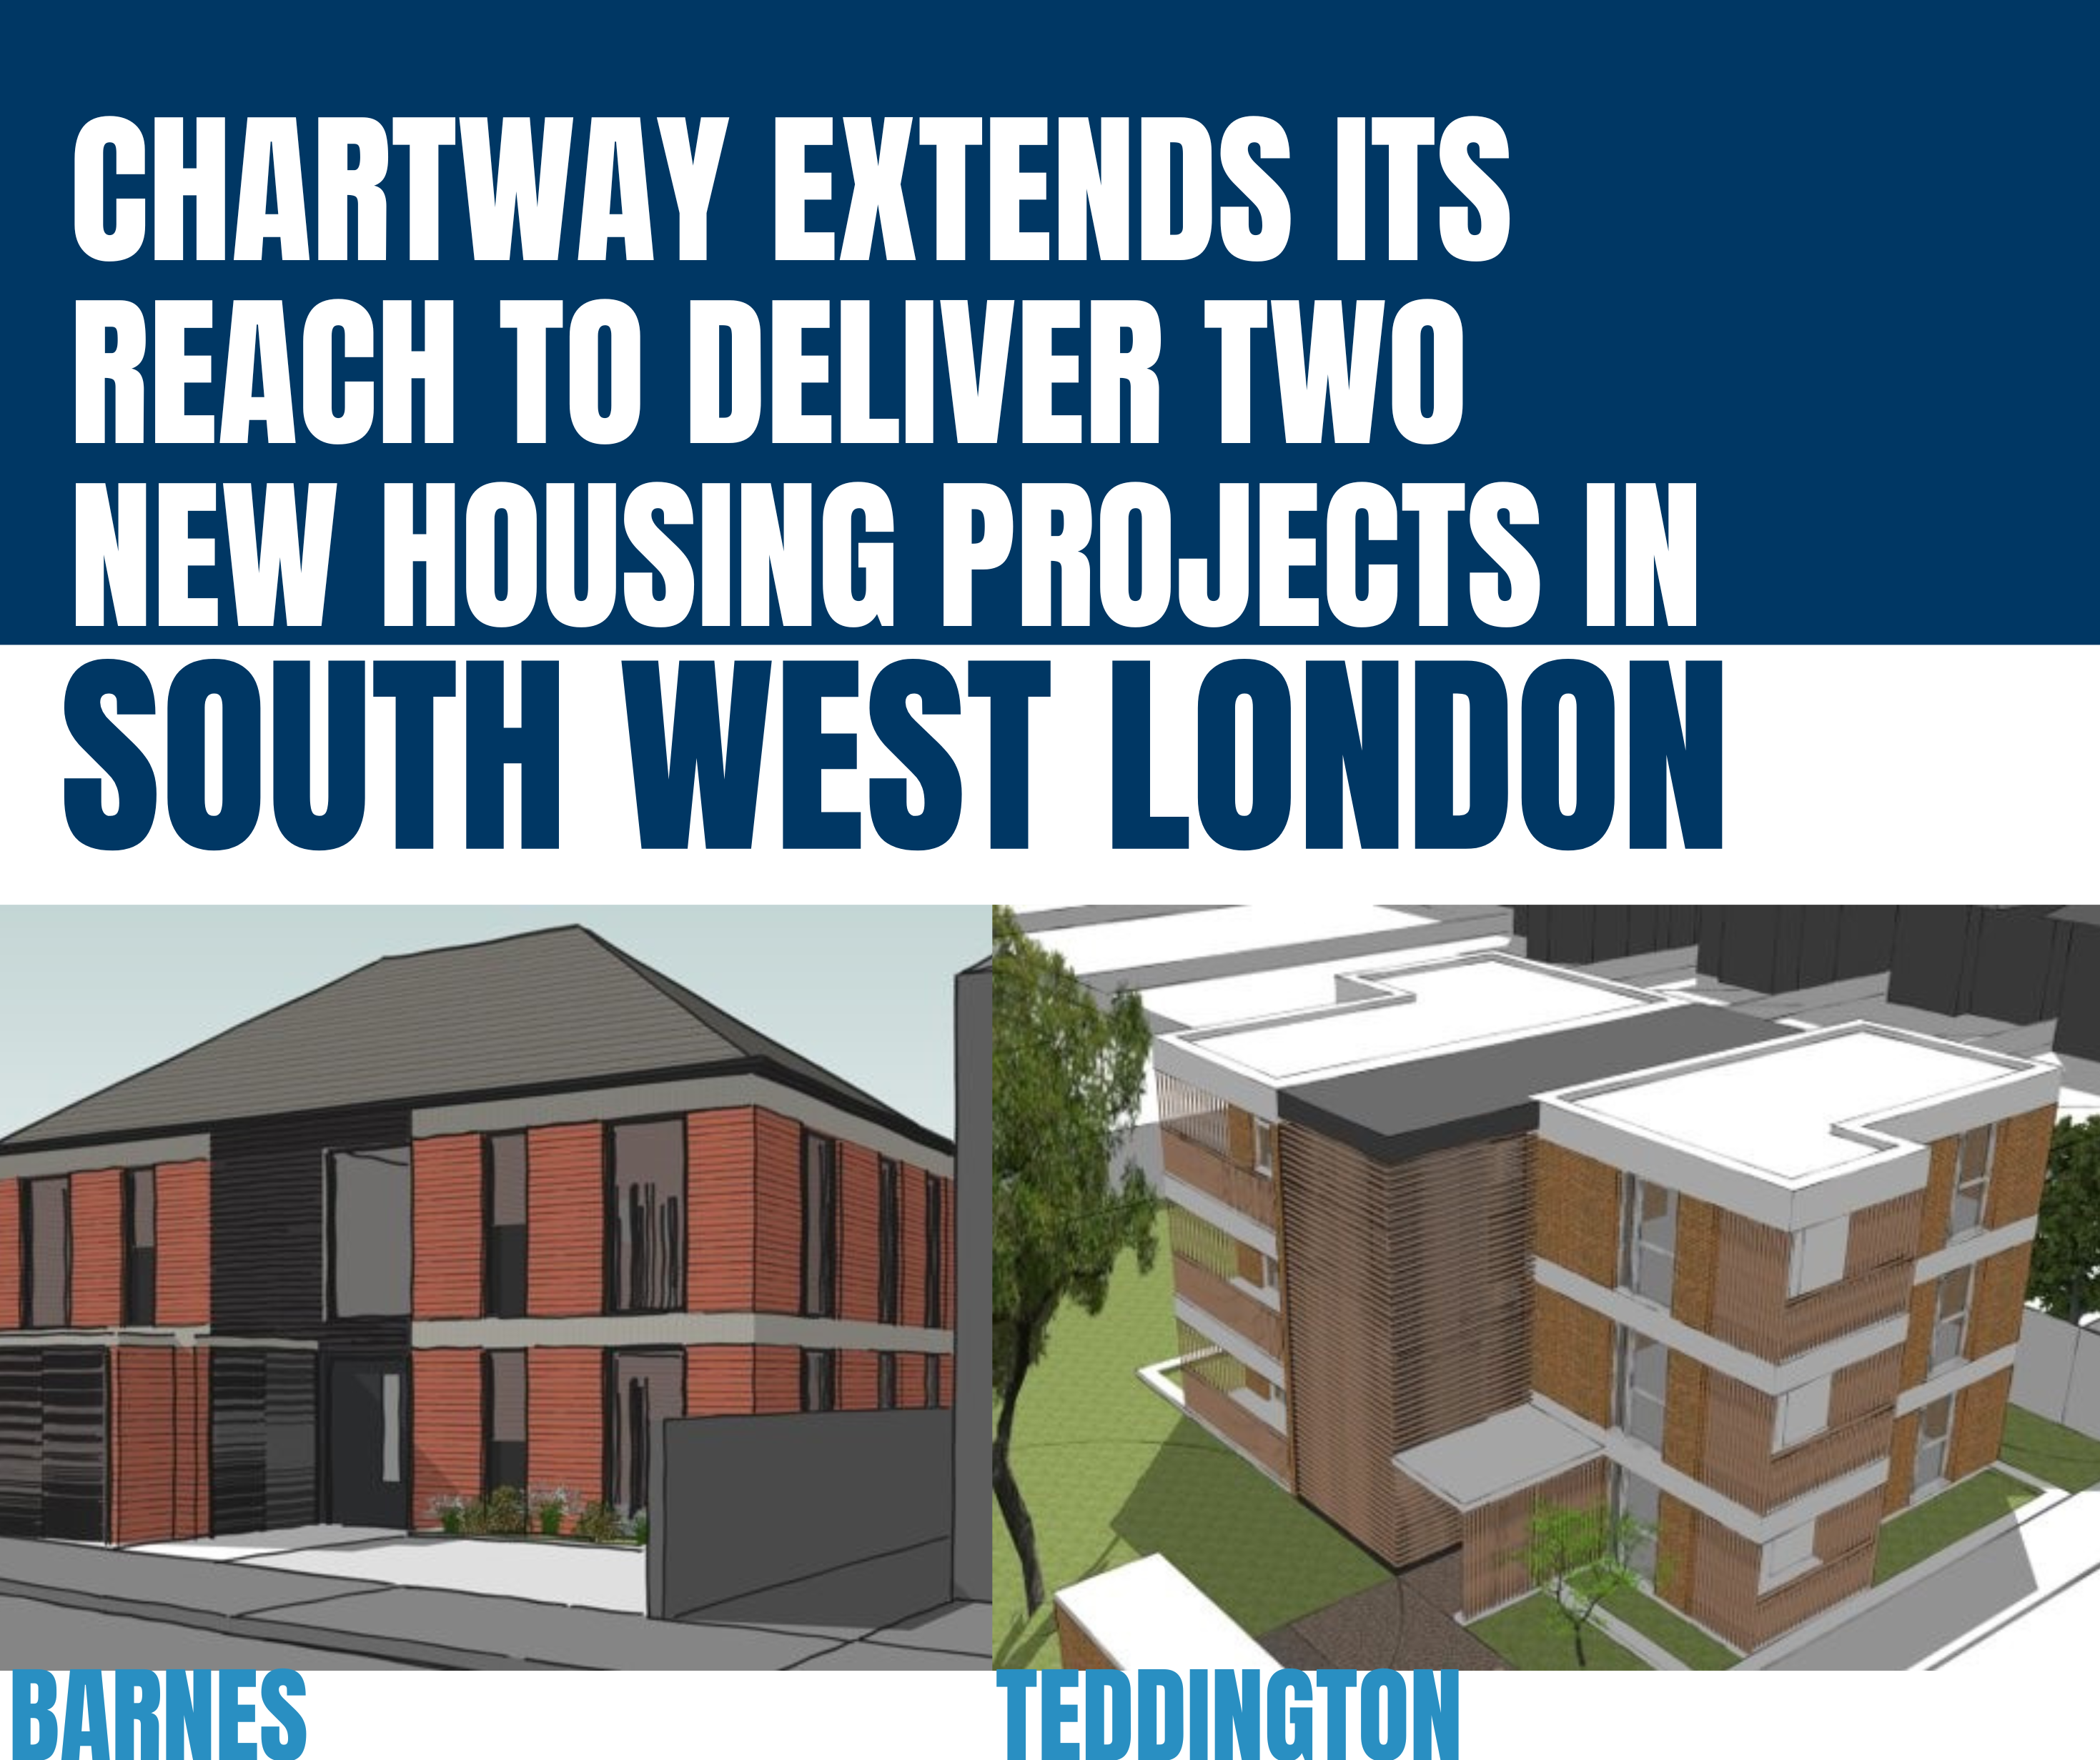 Chartway creates partnership with RHP to deliver new housing projects in South-West London